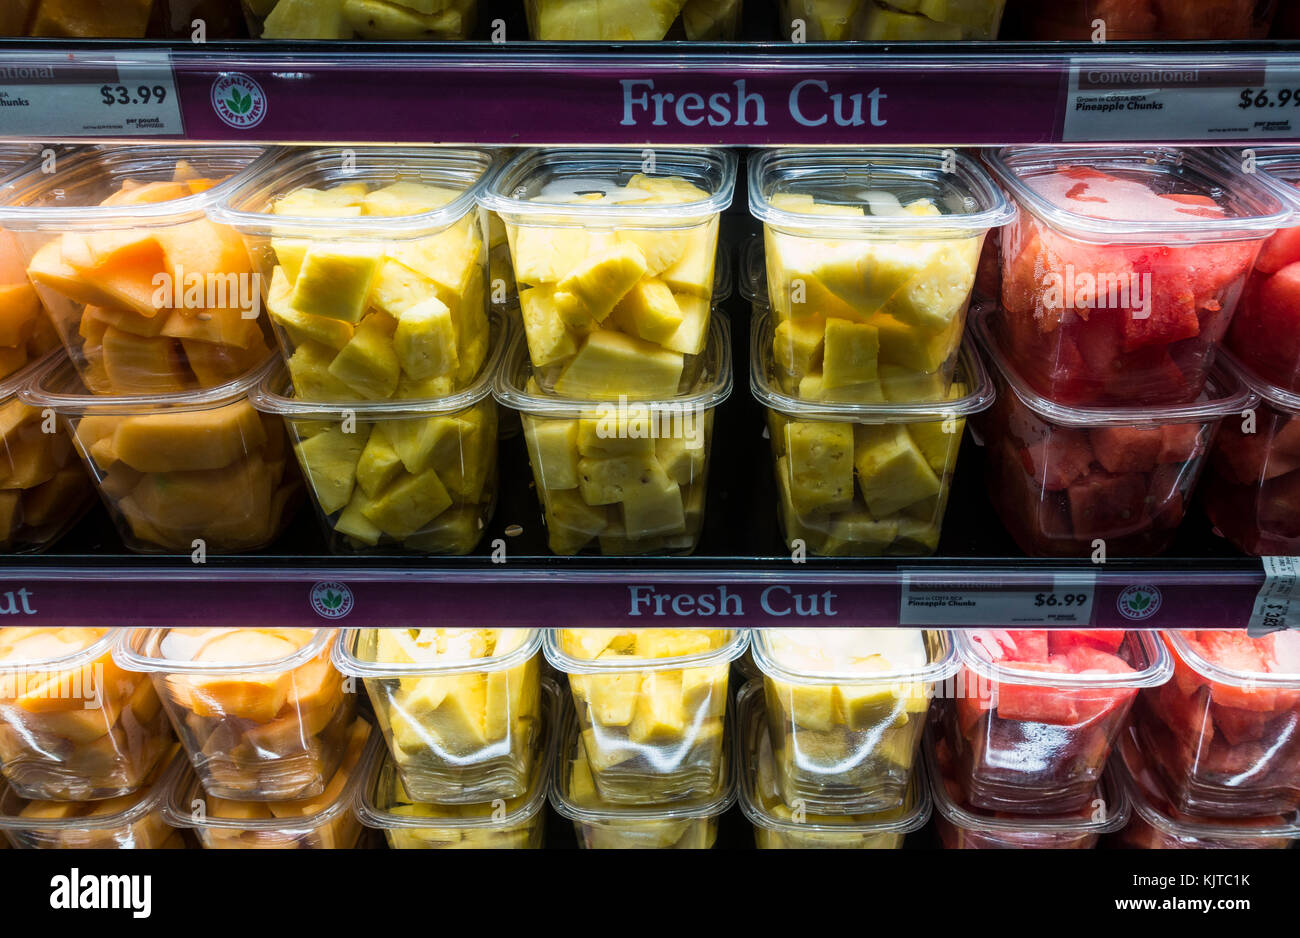 https://c8.alamy.com/comp/KJTC1K/fresh-cut-fruit-in-plastic-take-away-containers-a-a-whole-foods-in-KJTC1K.jpg